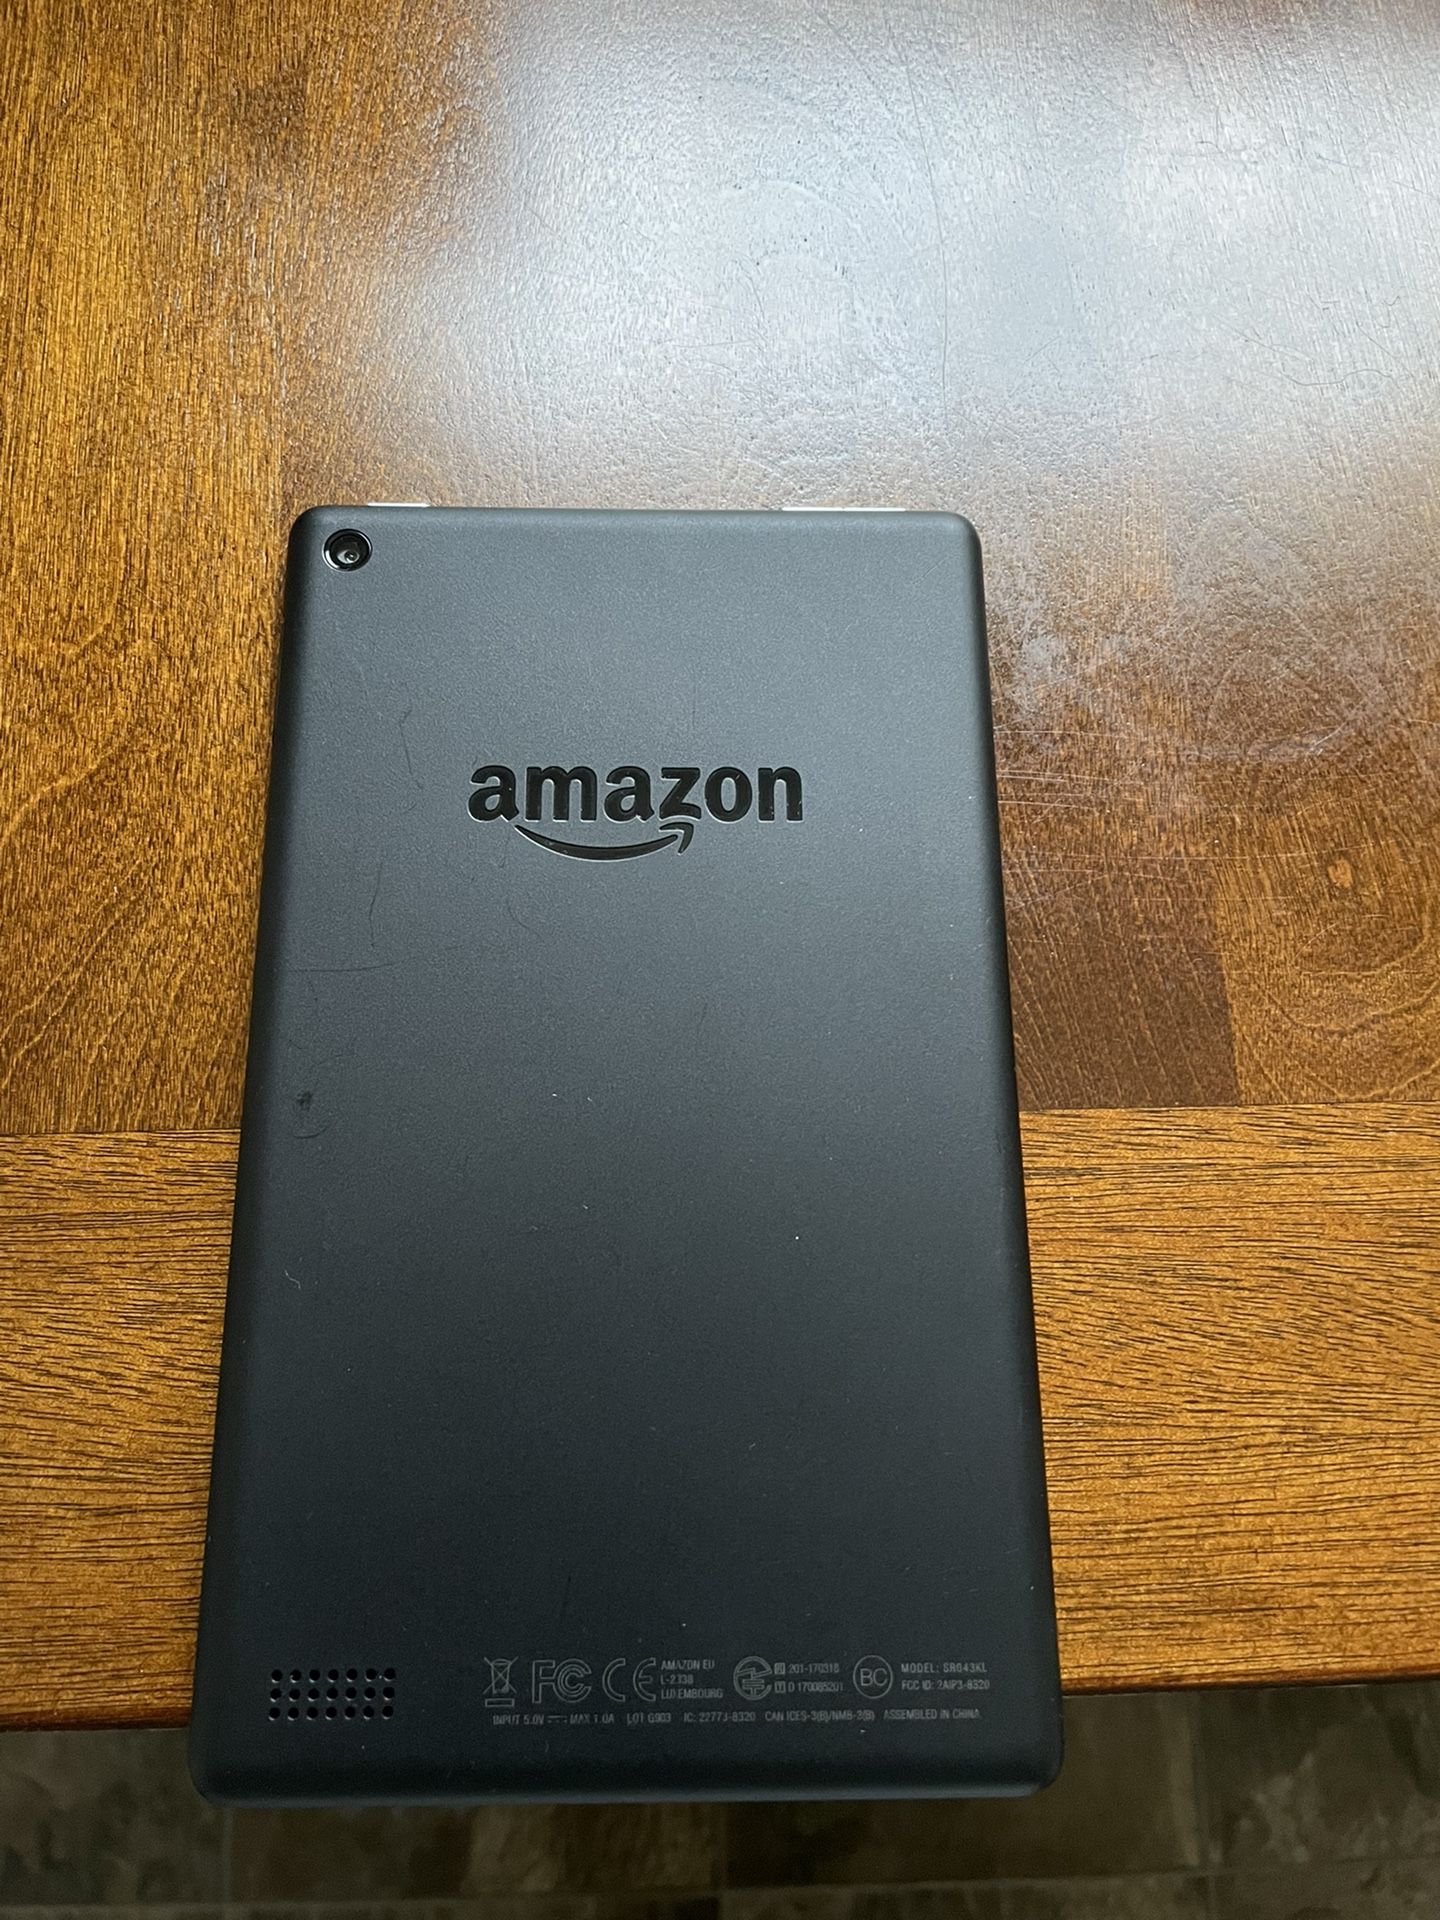 Kindle Fire 7 (7th Generation)